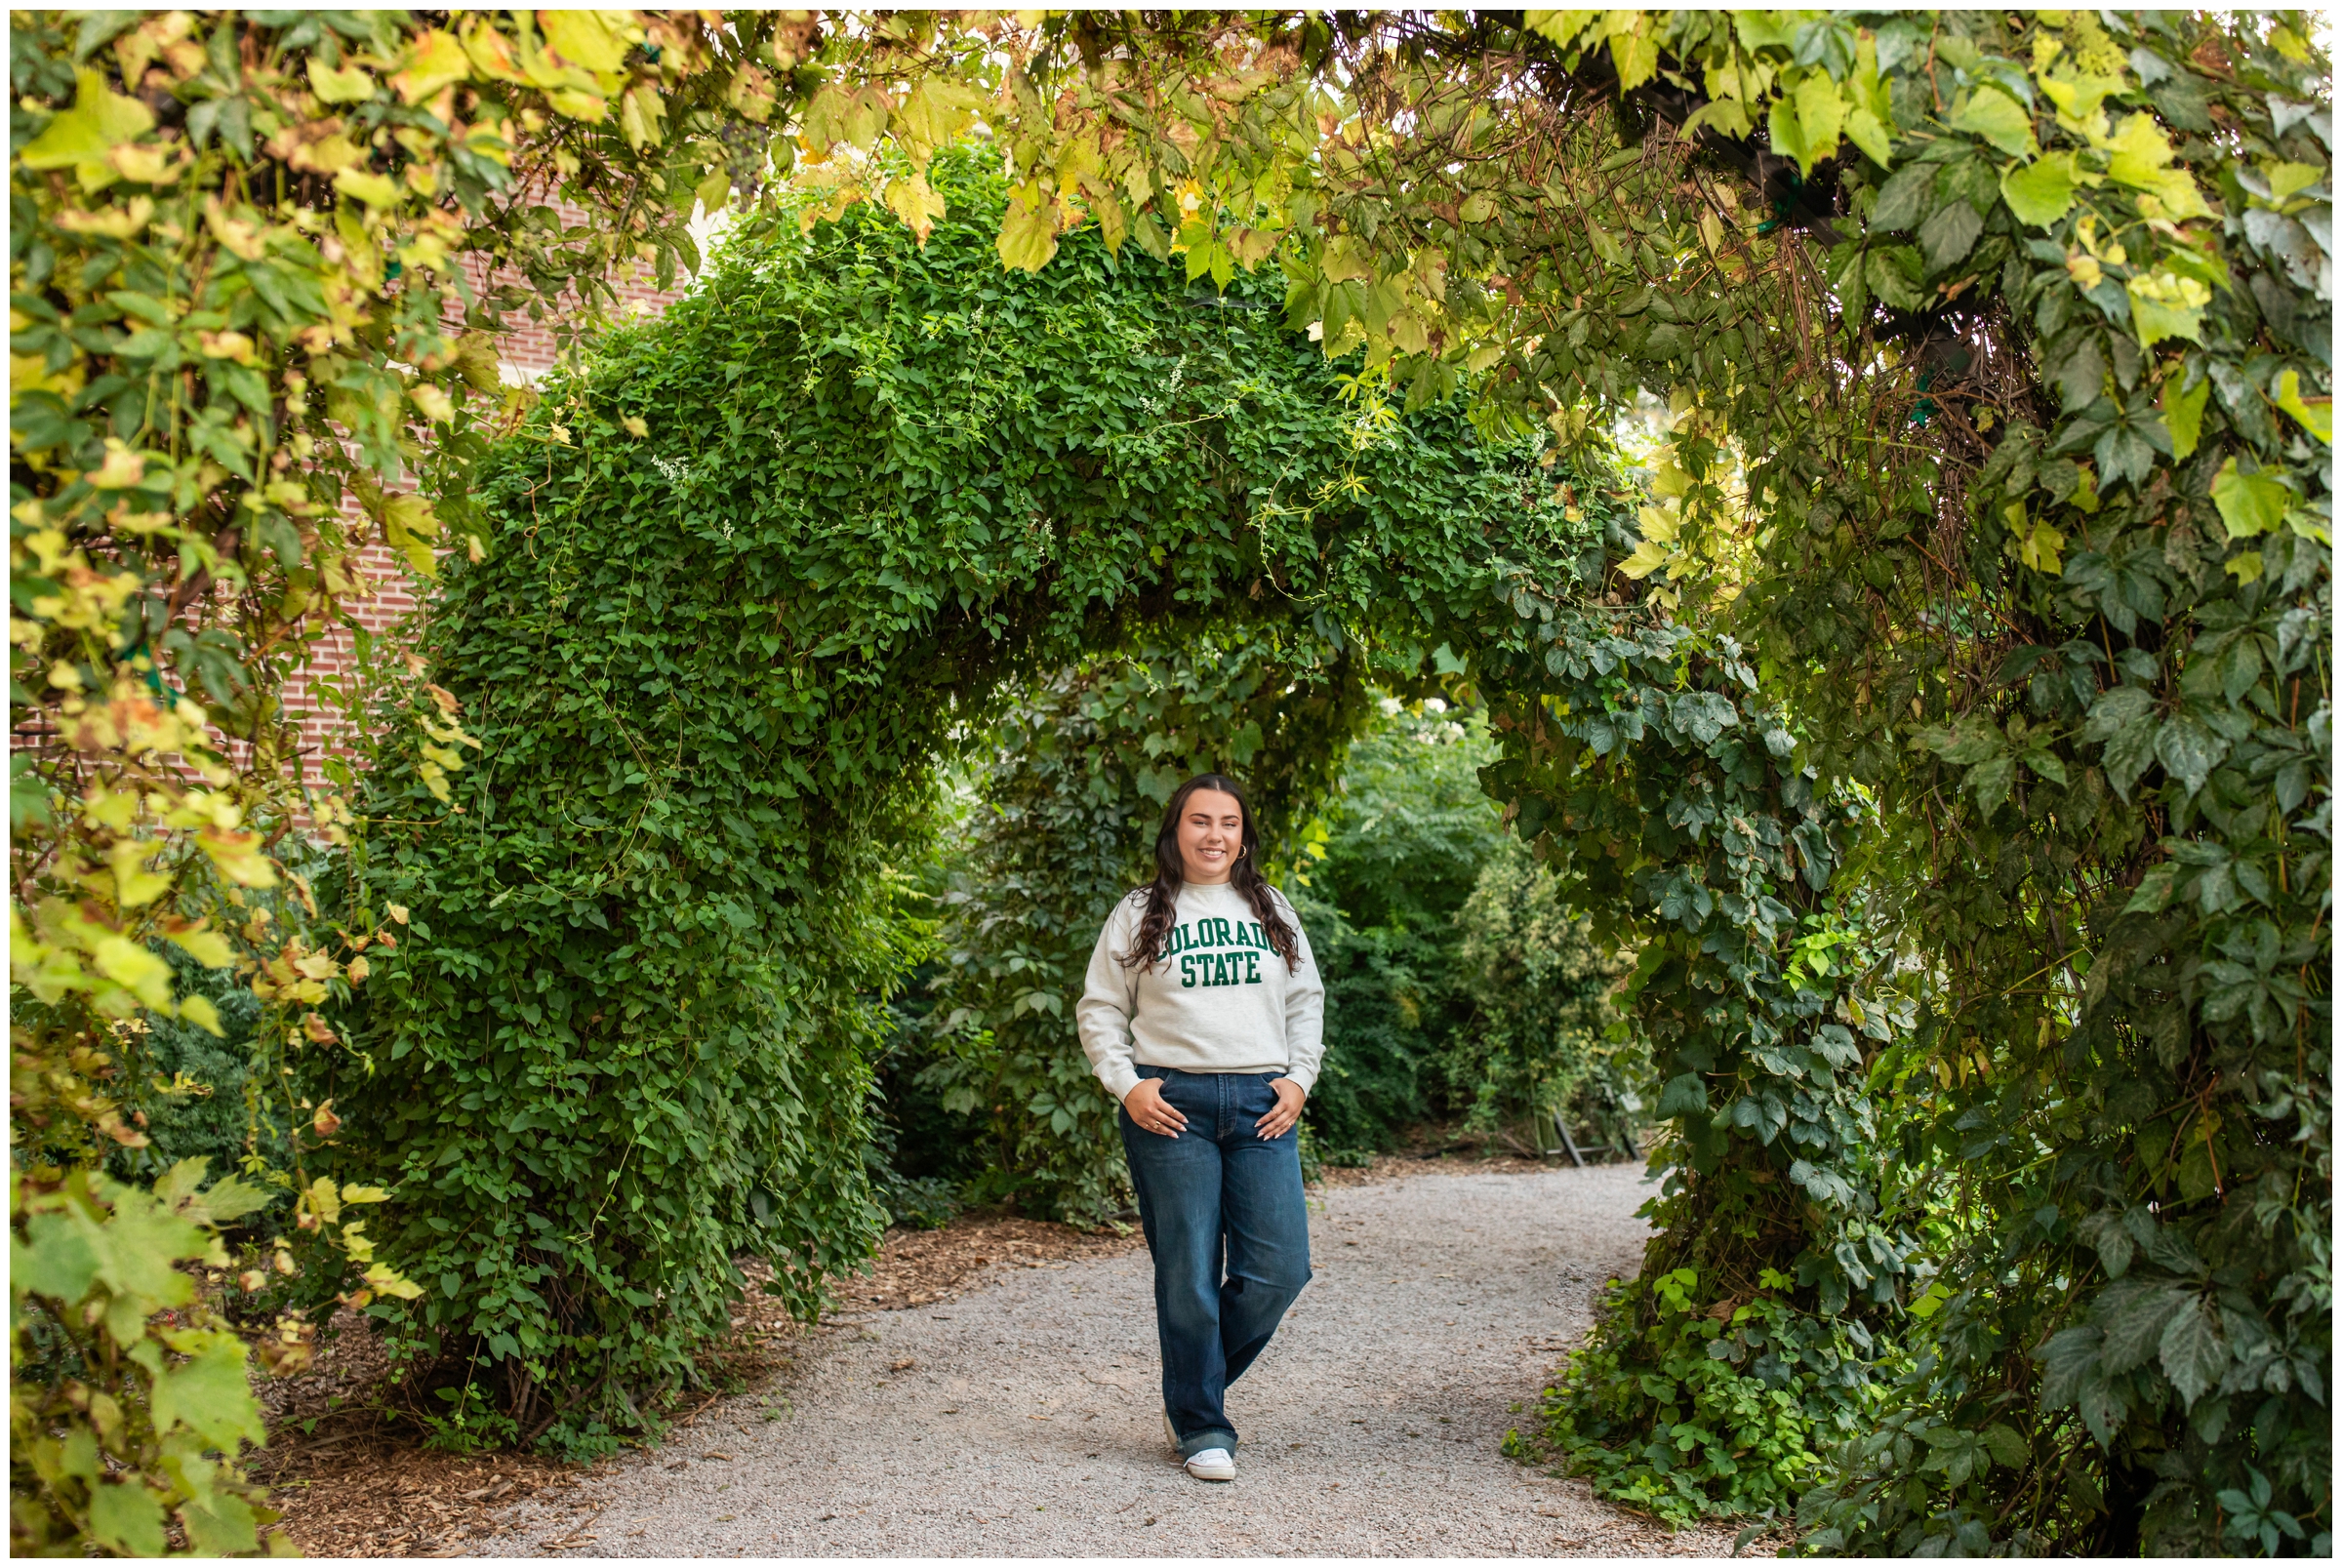 Fort Collins Colorado graduation photography session at the botanic gardens 